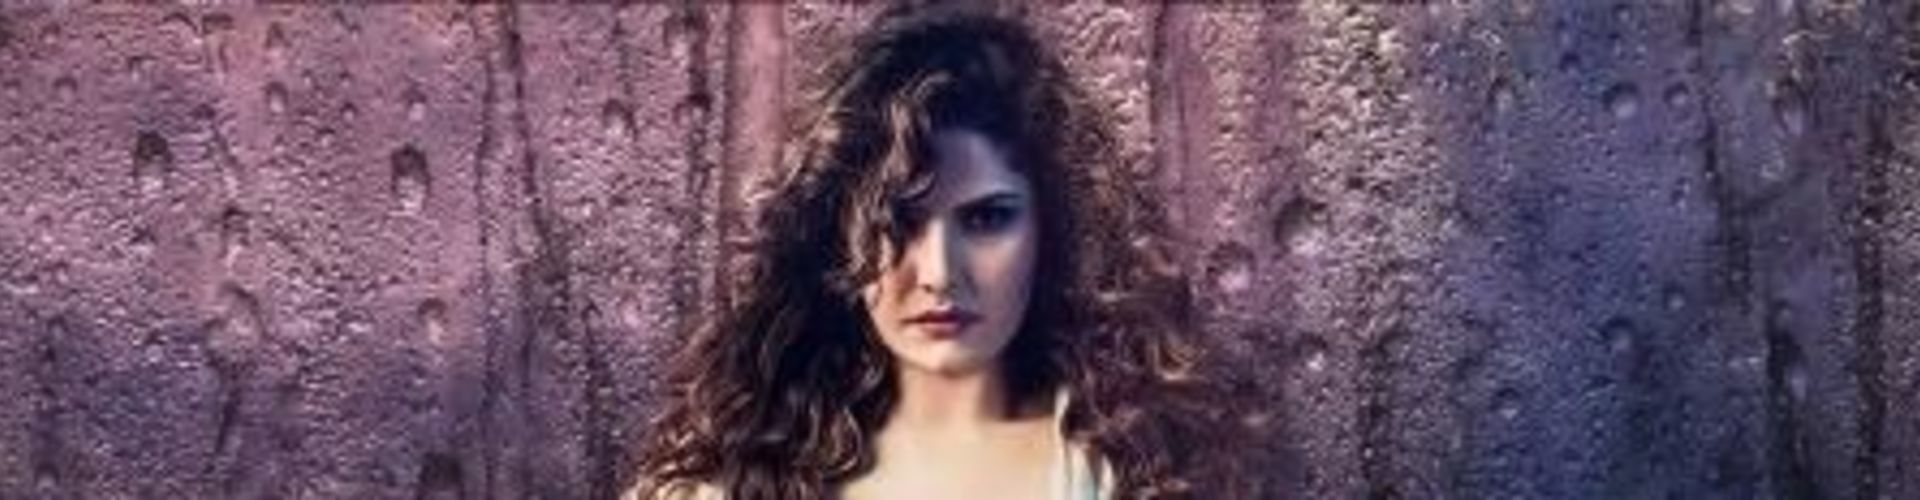 Aksar 2 Role was Not Challenging But Exciting - Zareen Khan